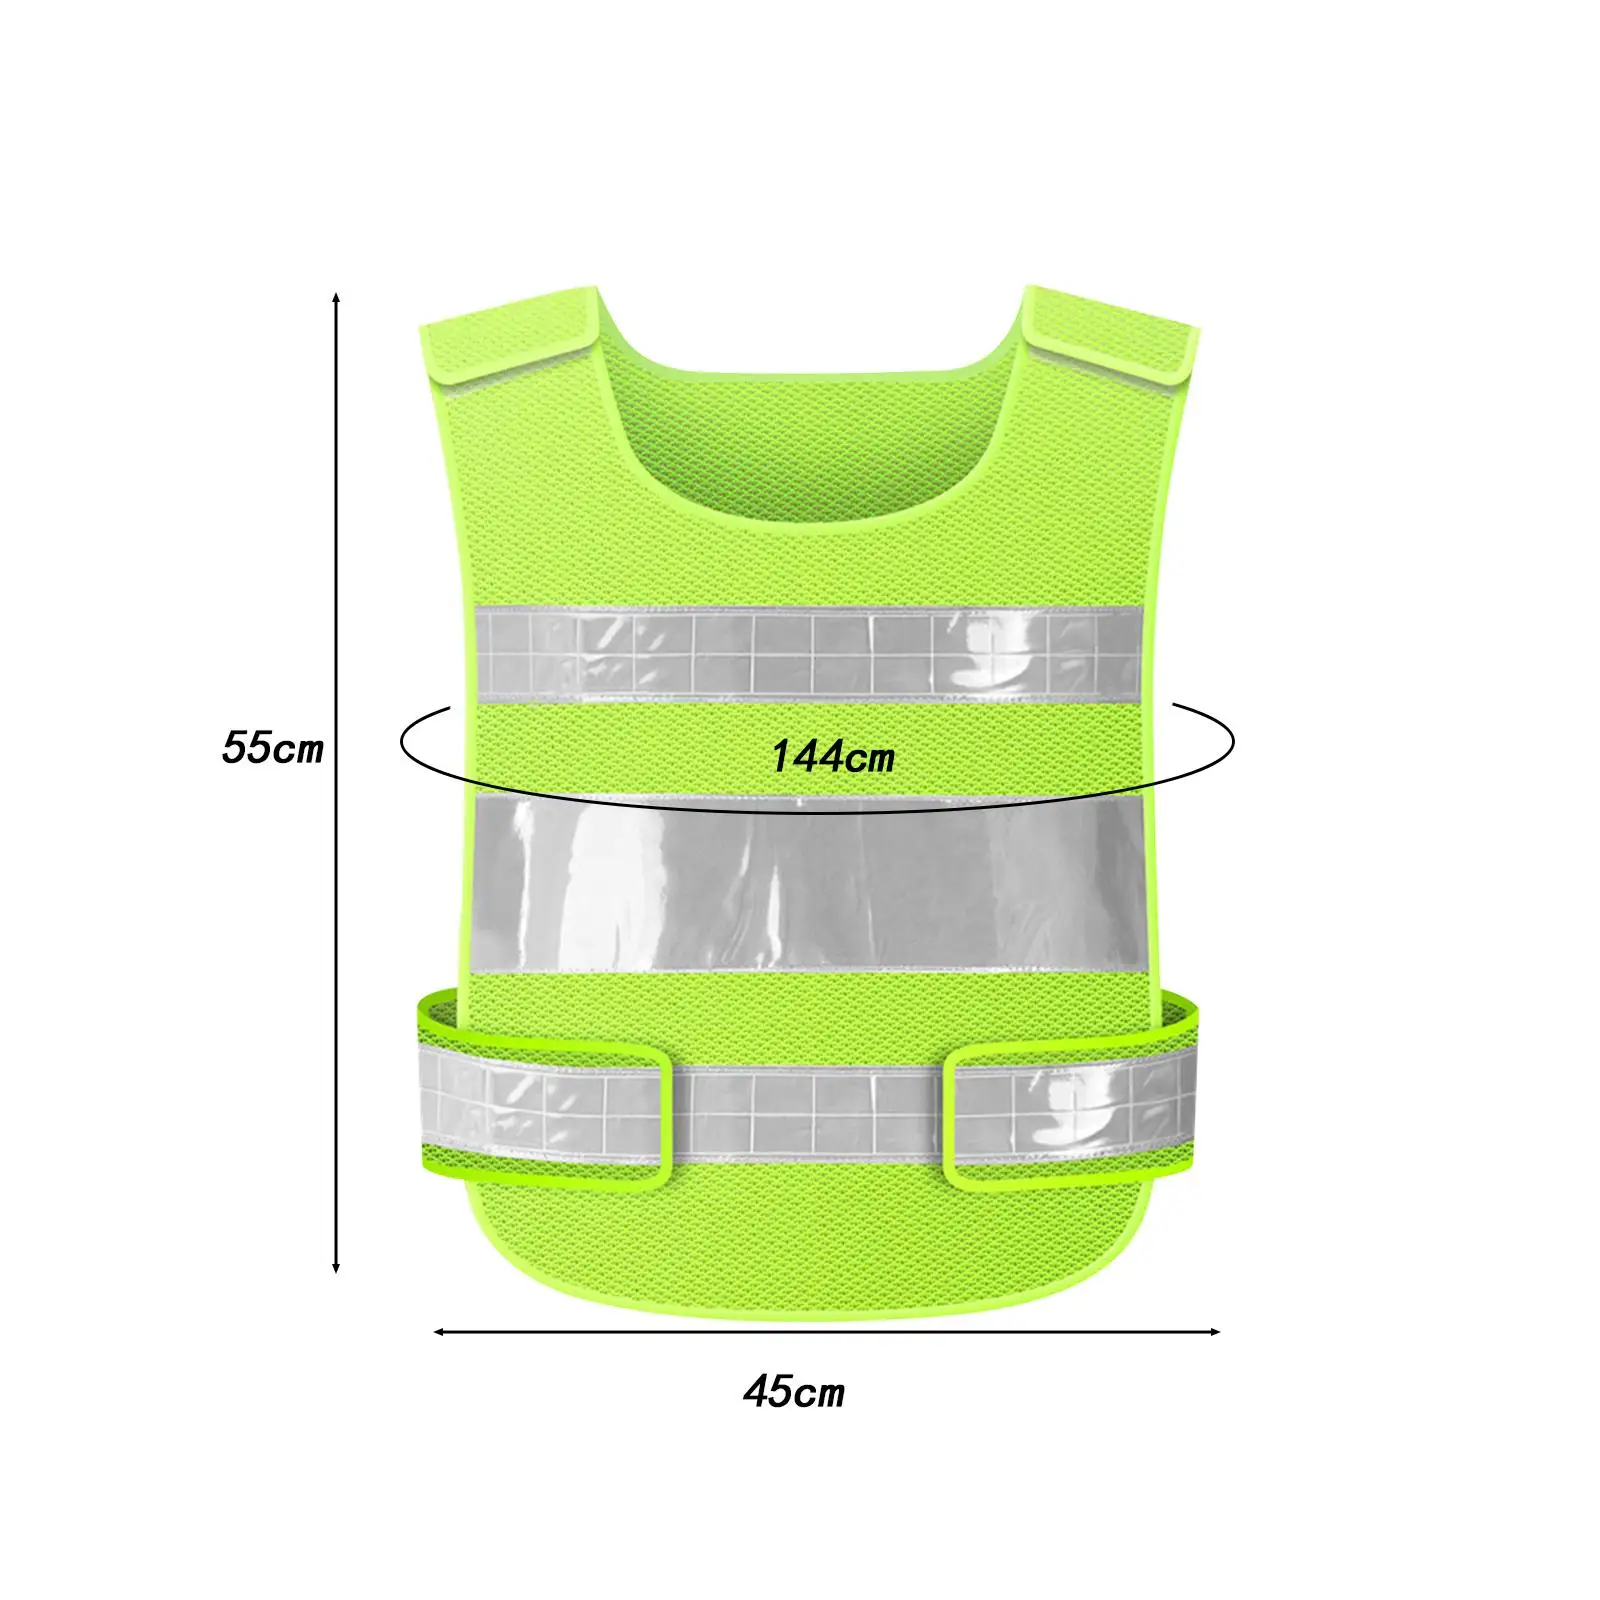 Reflective Vest High Visibility Construction Protector Biking Work Hiking with Reflective Strips Sleeveless Women Adults Men